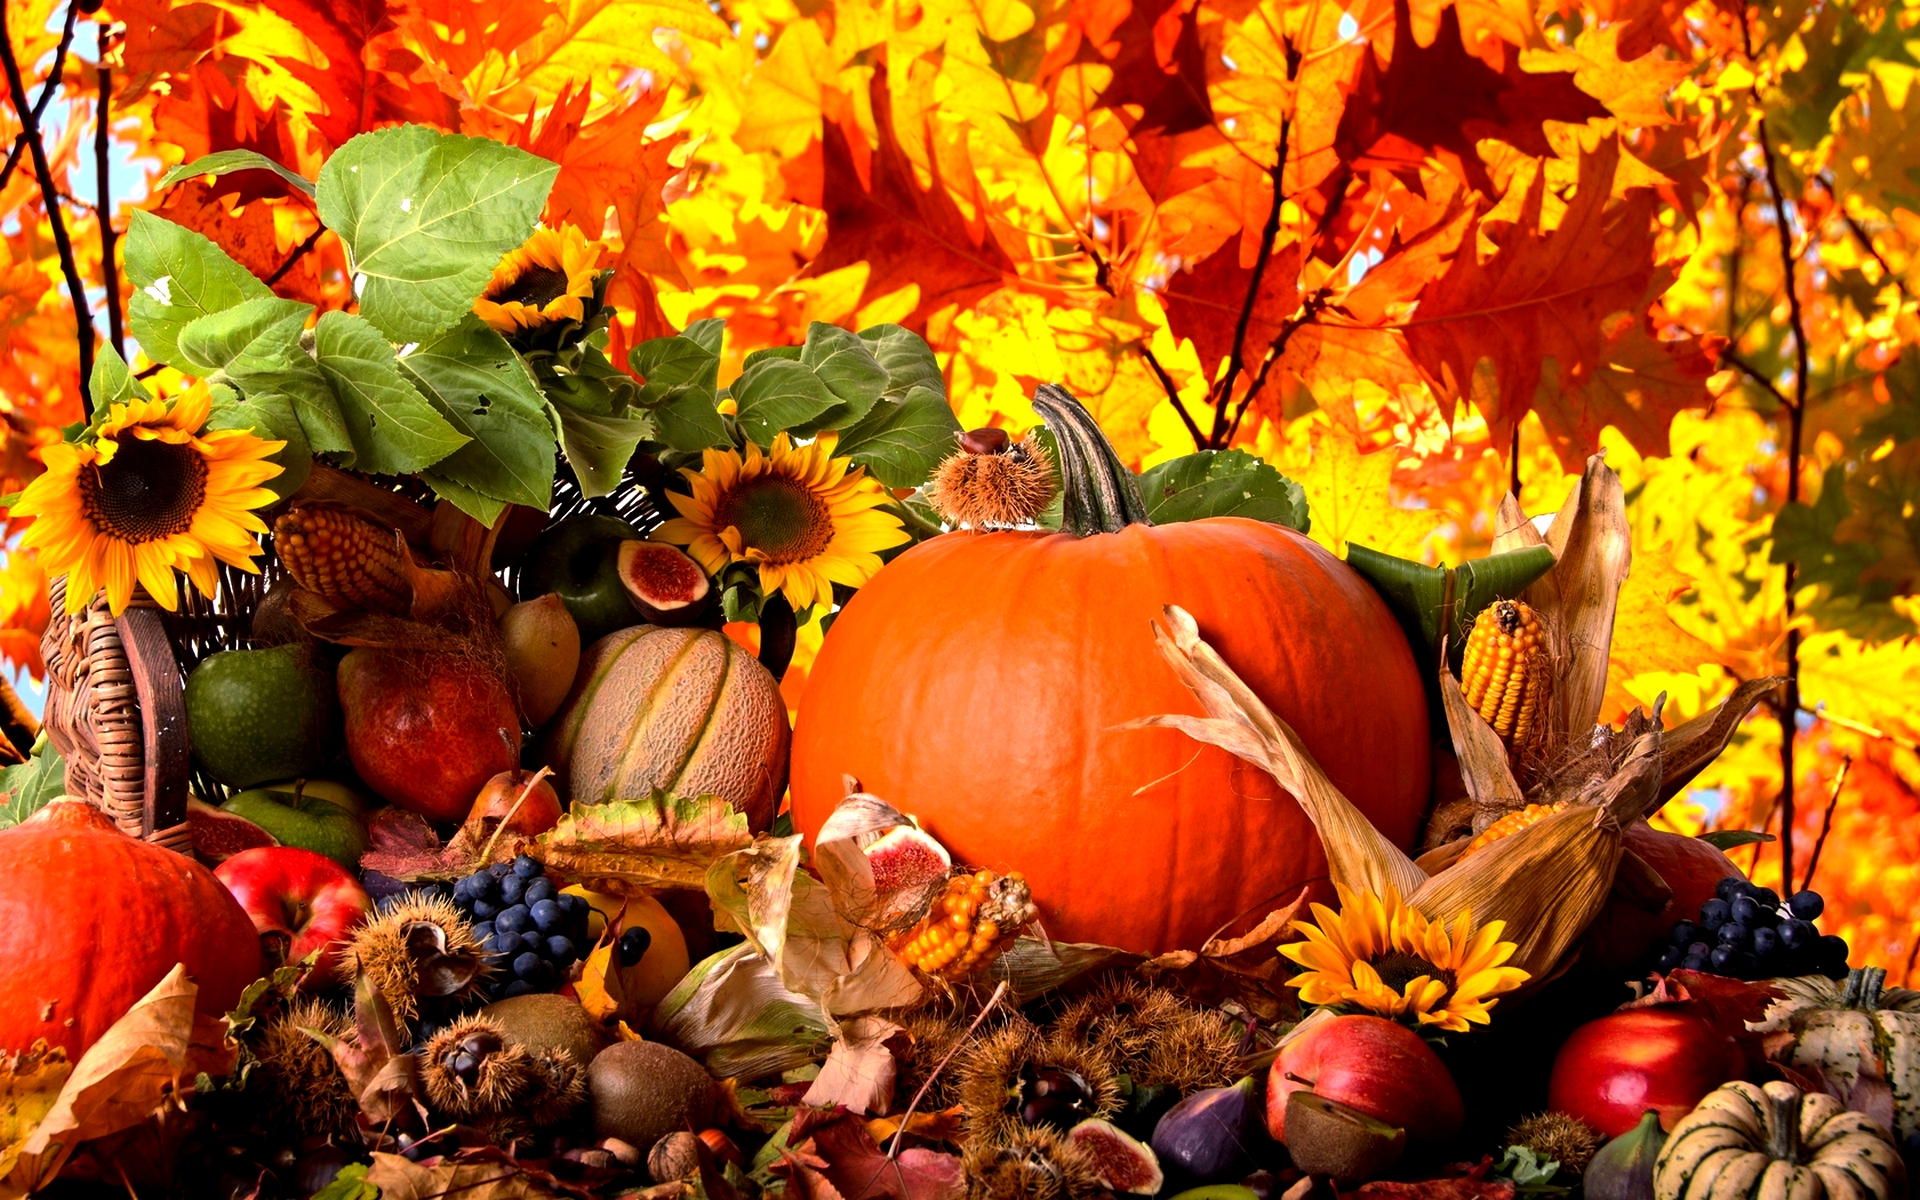 Autumn Harvest Abstract Wallpapers Hd Free 1920x1200px